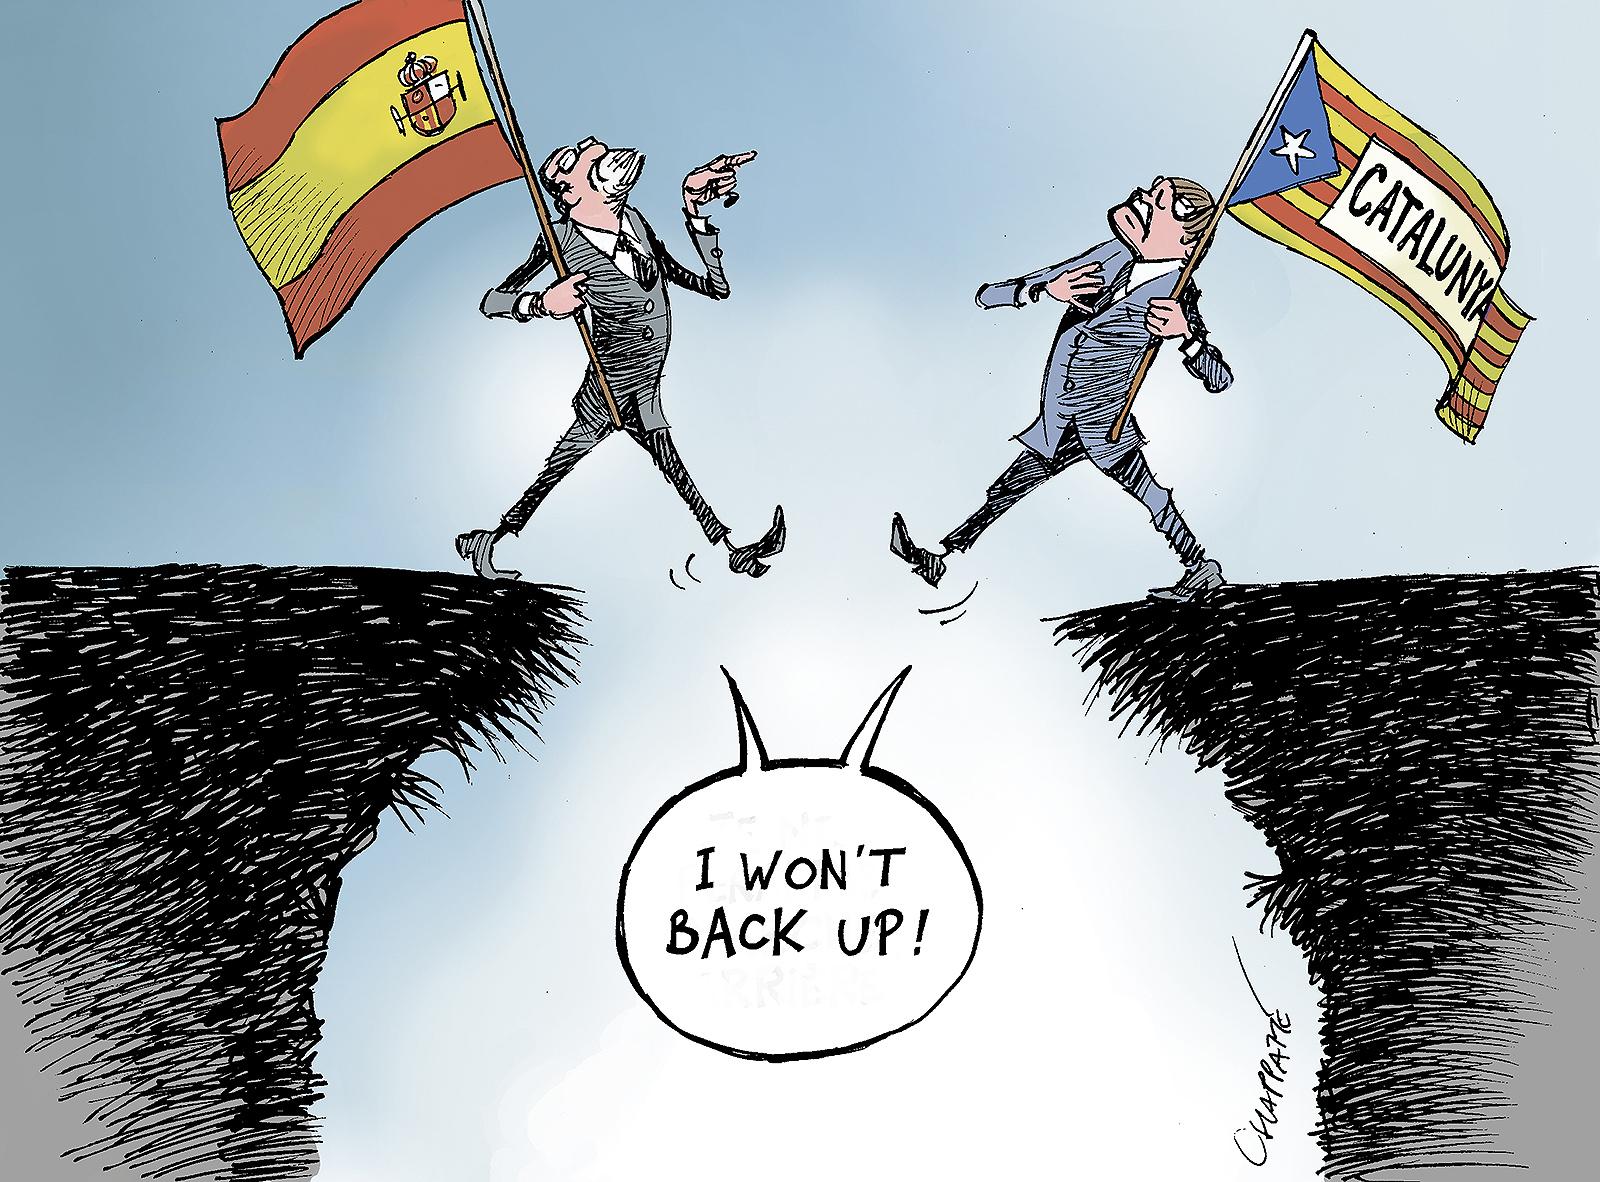 Catalonia, the point of no return